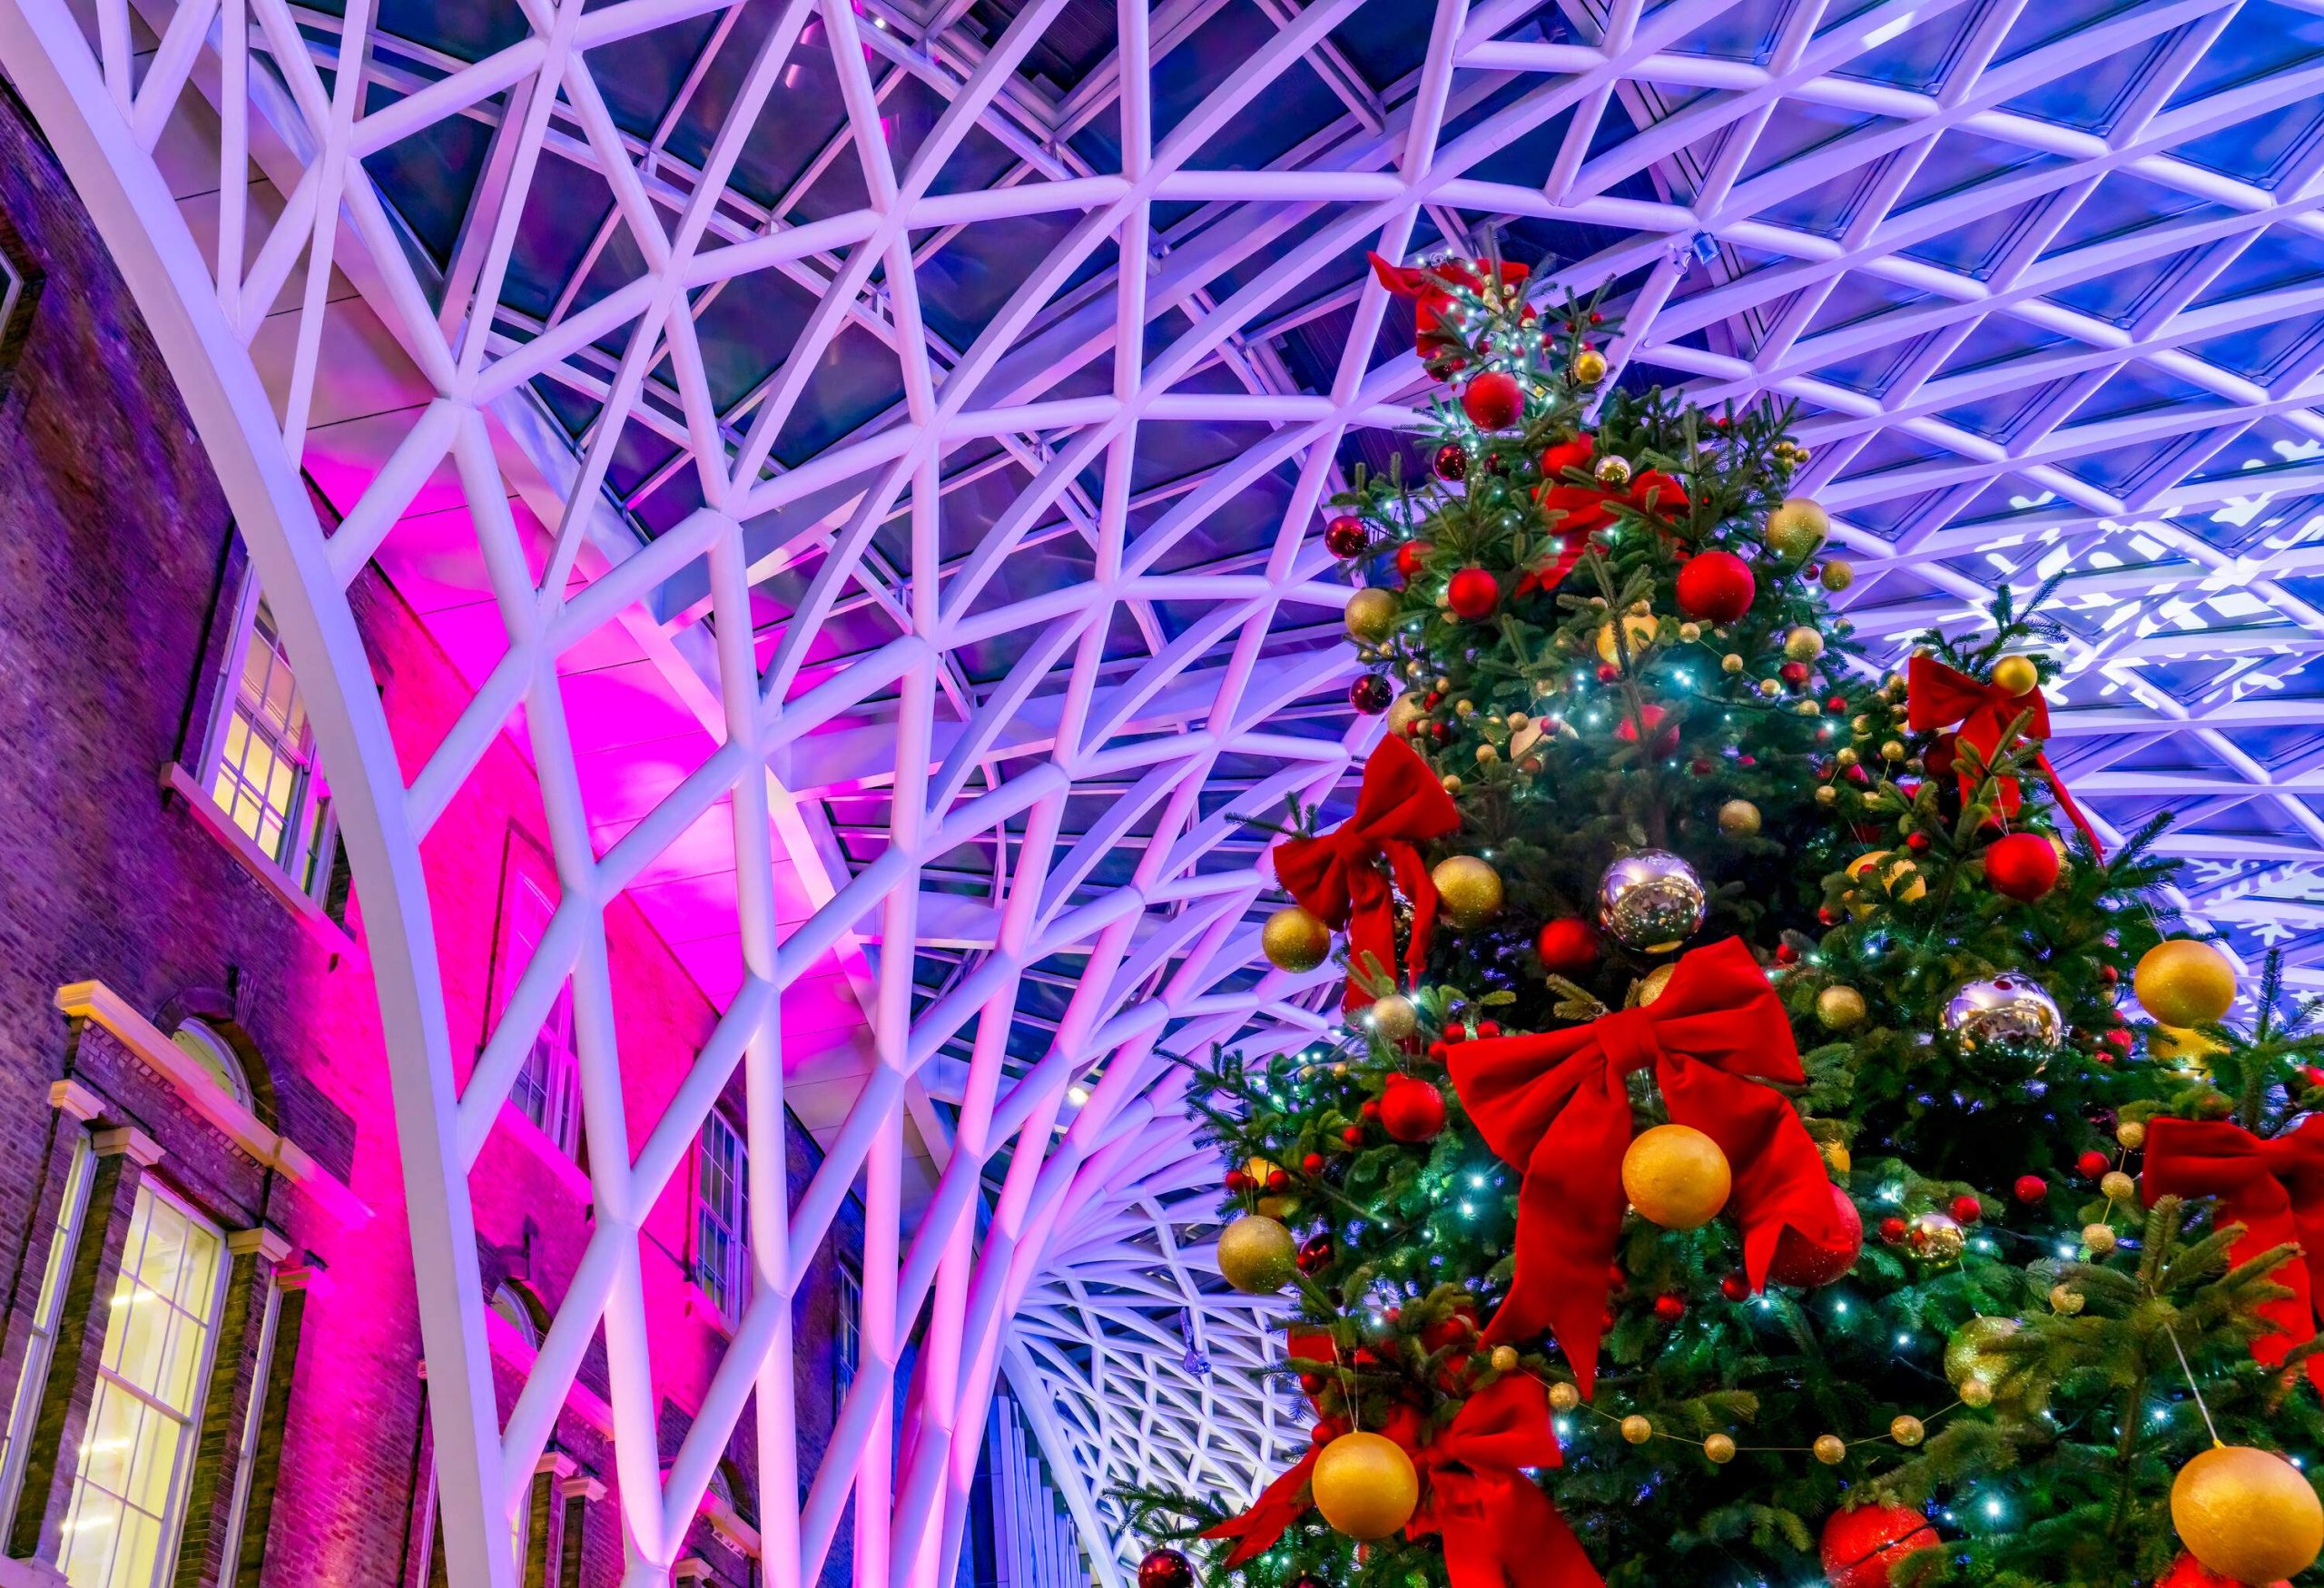 King's Cross station concourse at Christmas 2021. King's Cross is the Main London rail station for the East Coast London to Edinburgh route, it is situated in North East London, near Camden, England, UK.